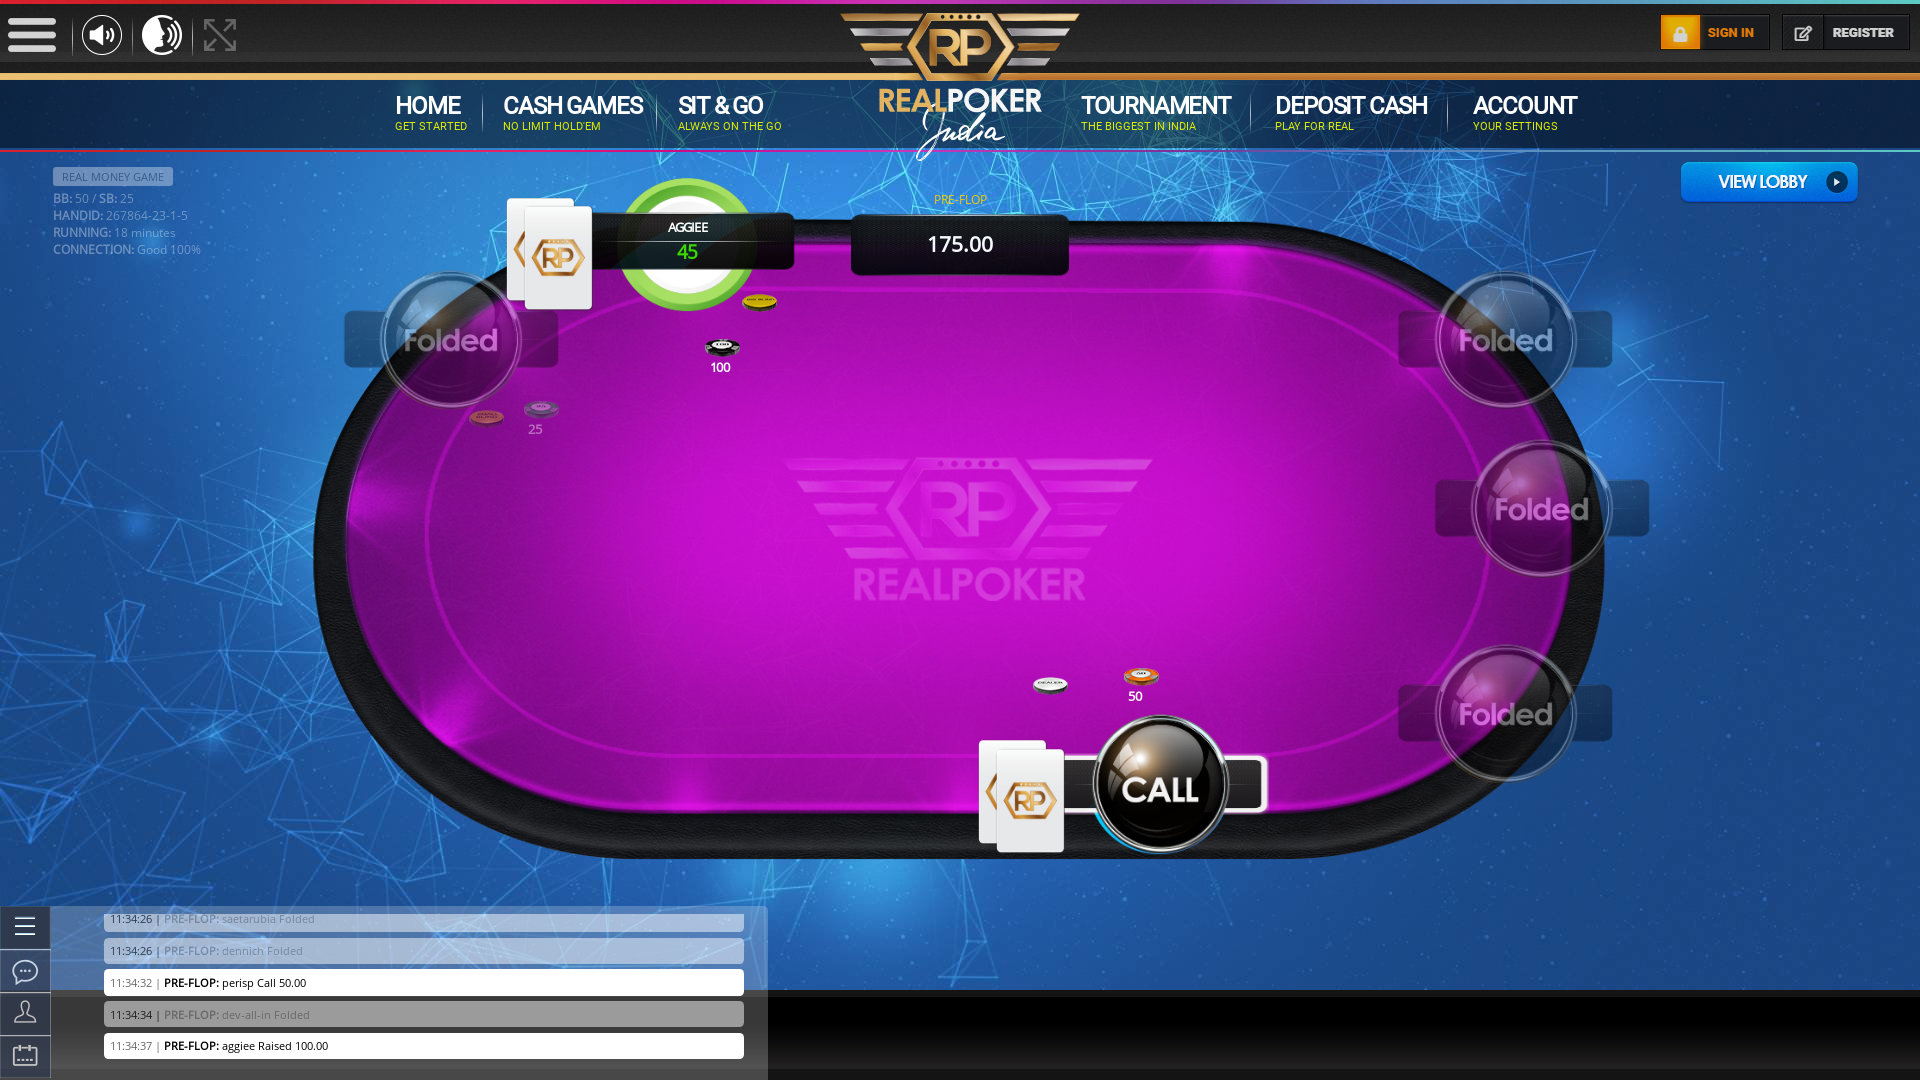 Santa Cruz, Mumbai poker table on a 10 player table in the 17th minute of the match